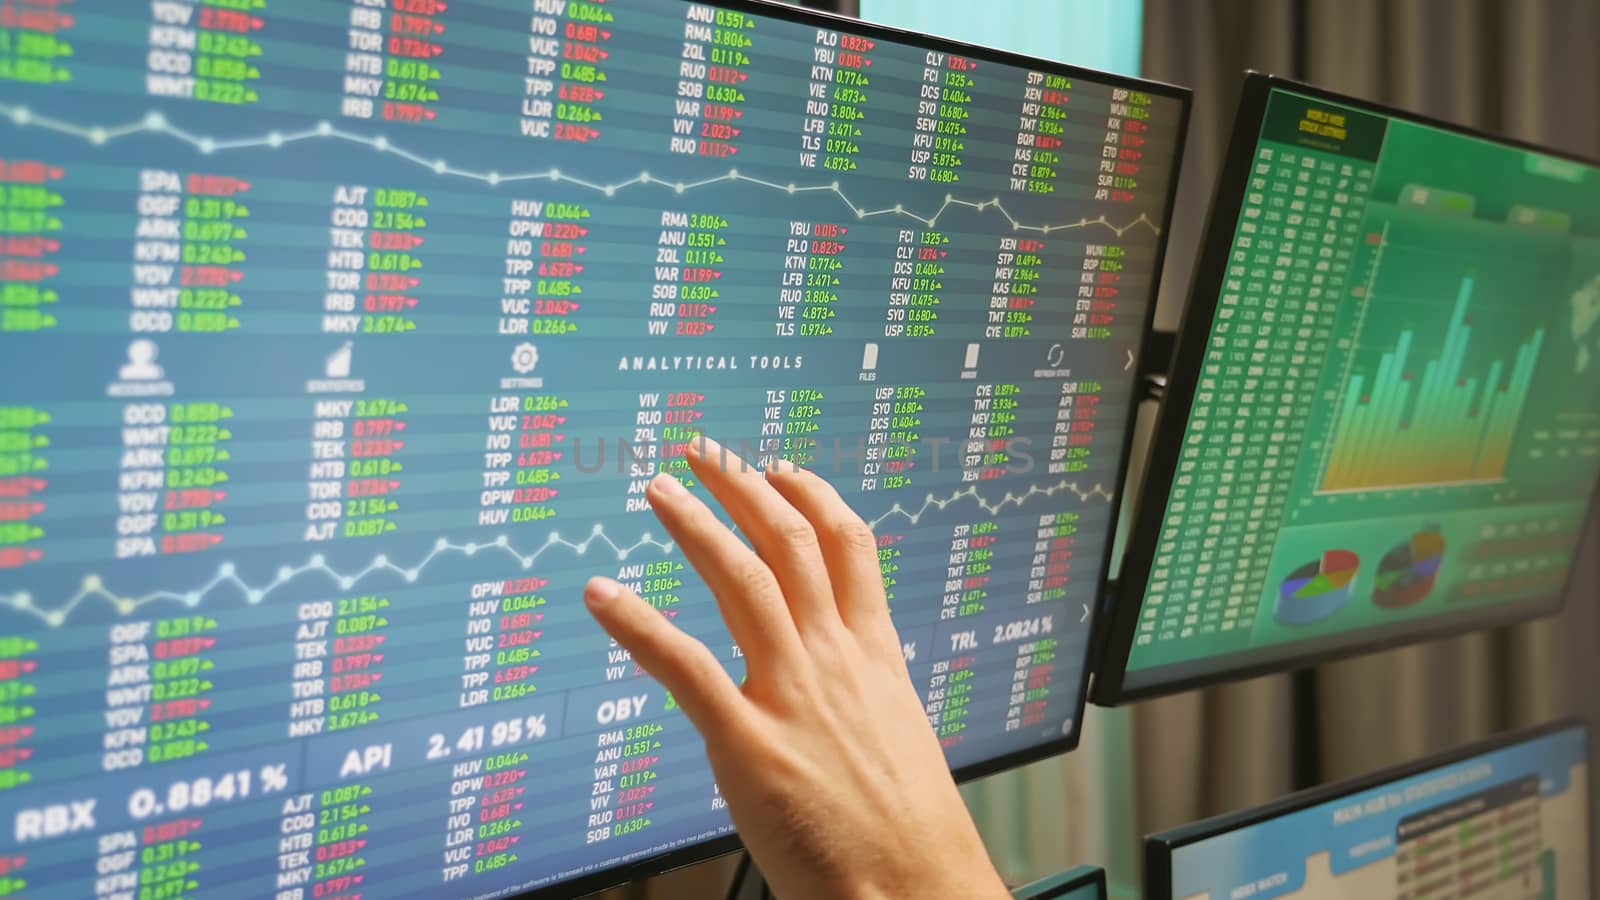 Close up of stock market trader hand on monitors with financial graphs.